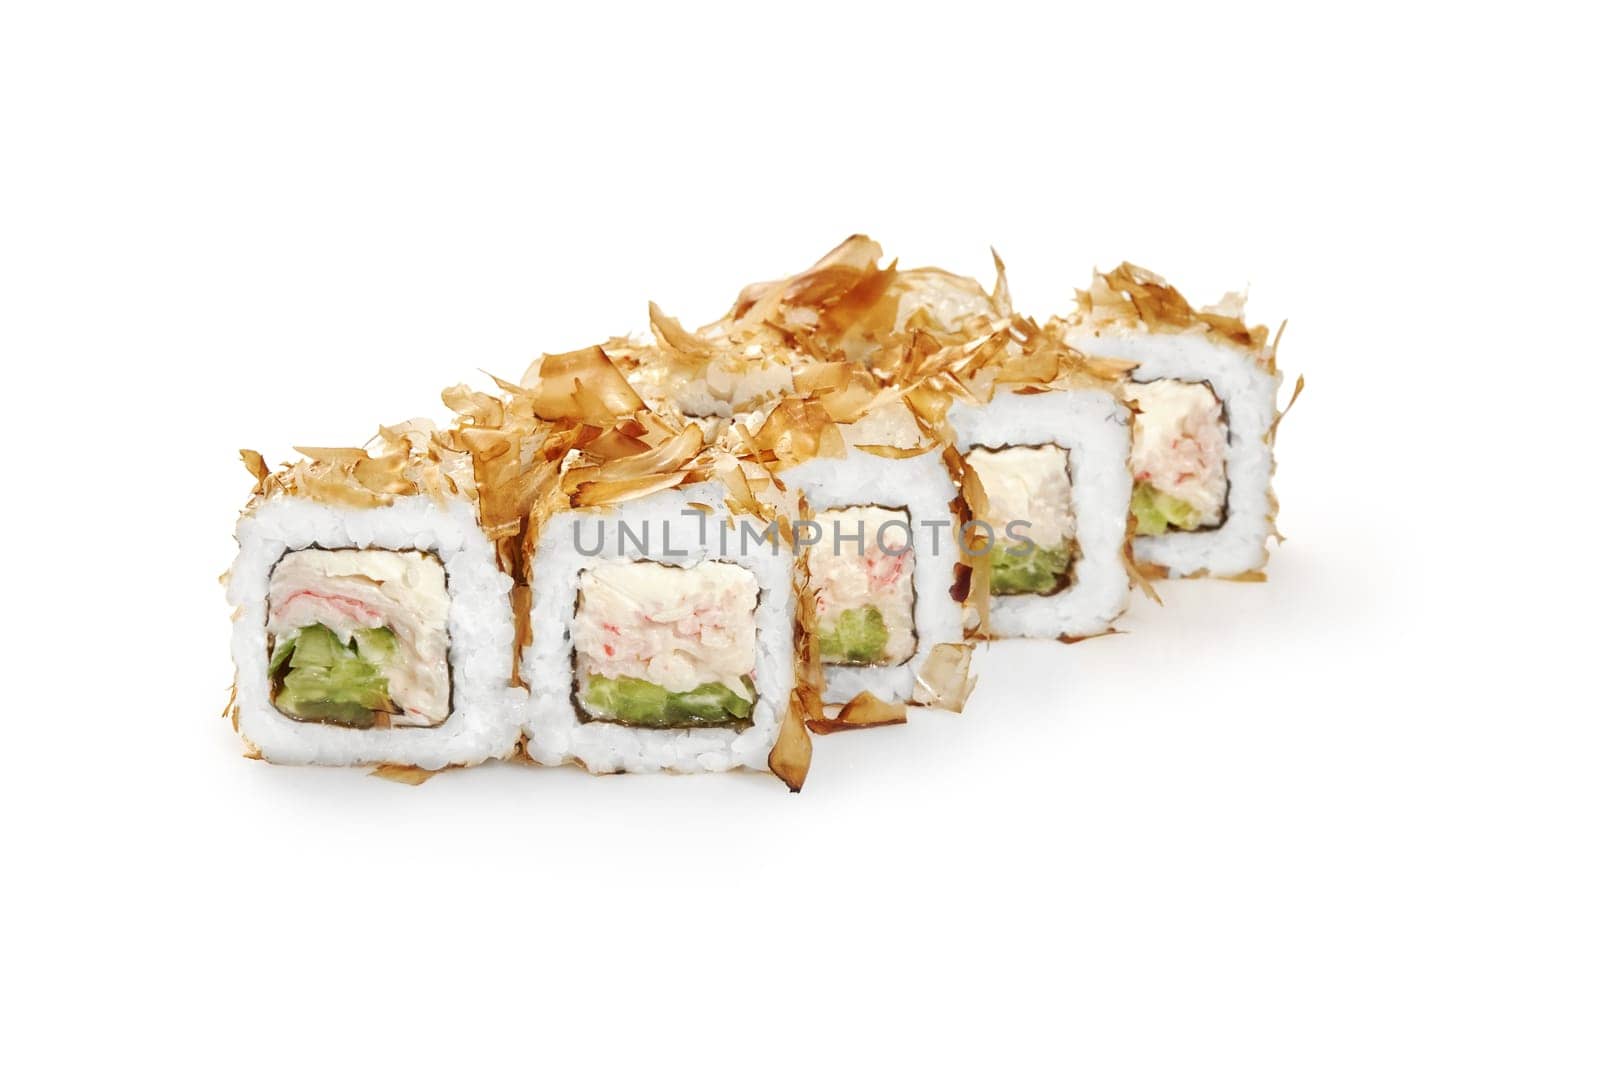 Delicious rolls filled with surimi, cream cheese and cucumbers coated with crispy smoked bonito flakes on white background. Popular sushi bar menu